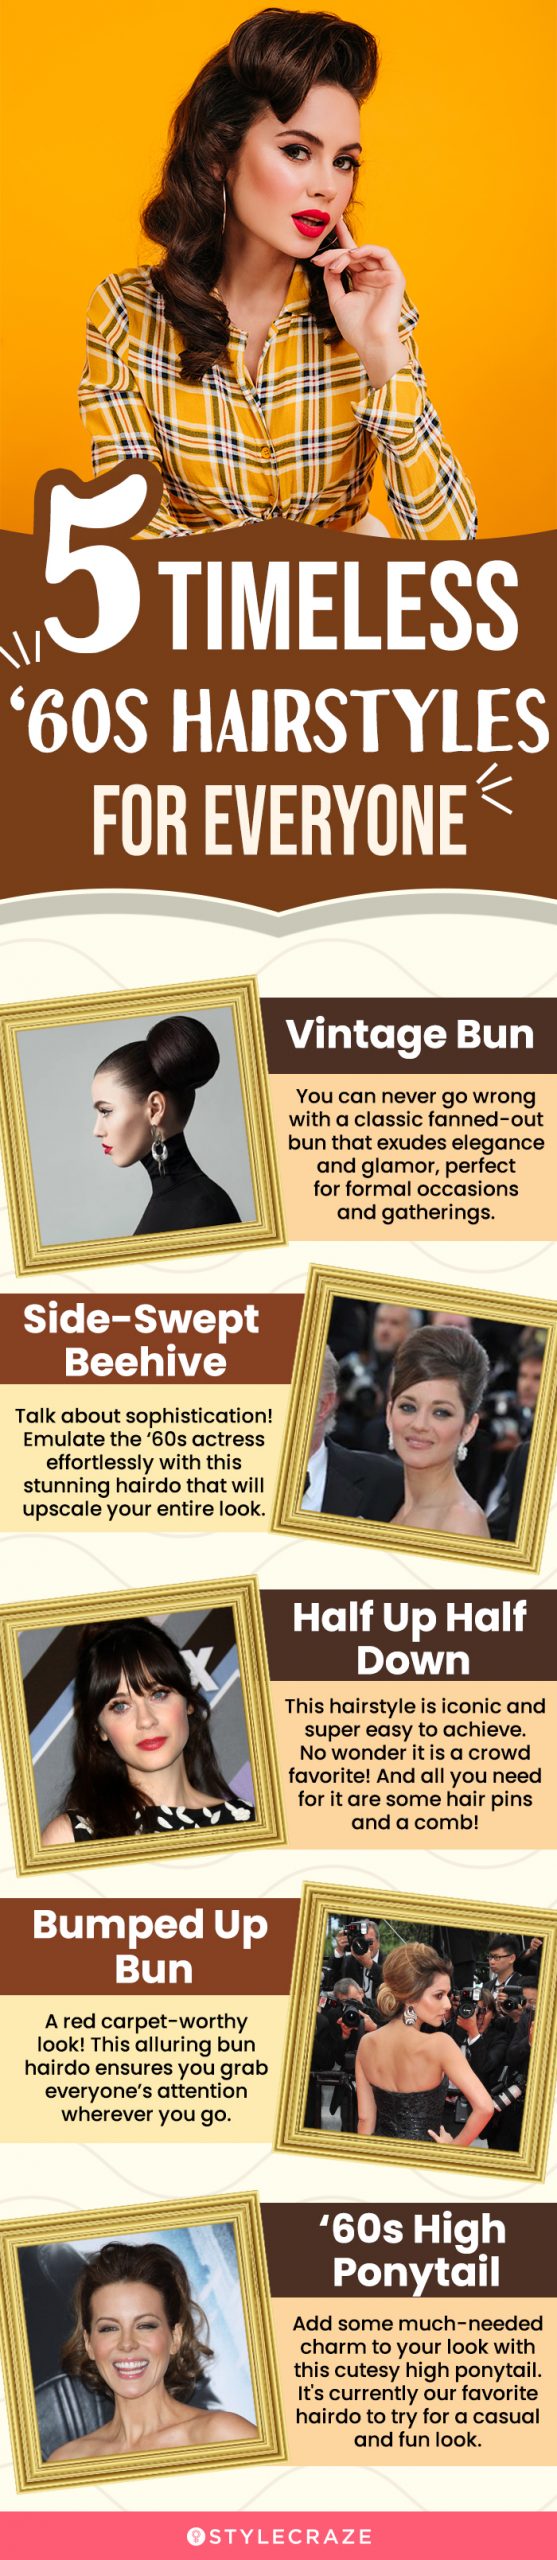 5 timeless ‘60s hairstyles for everyone (infographic)